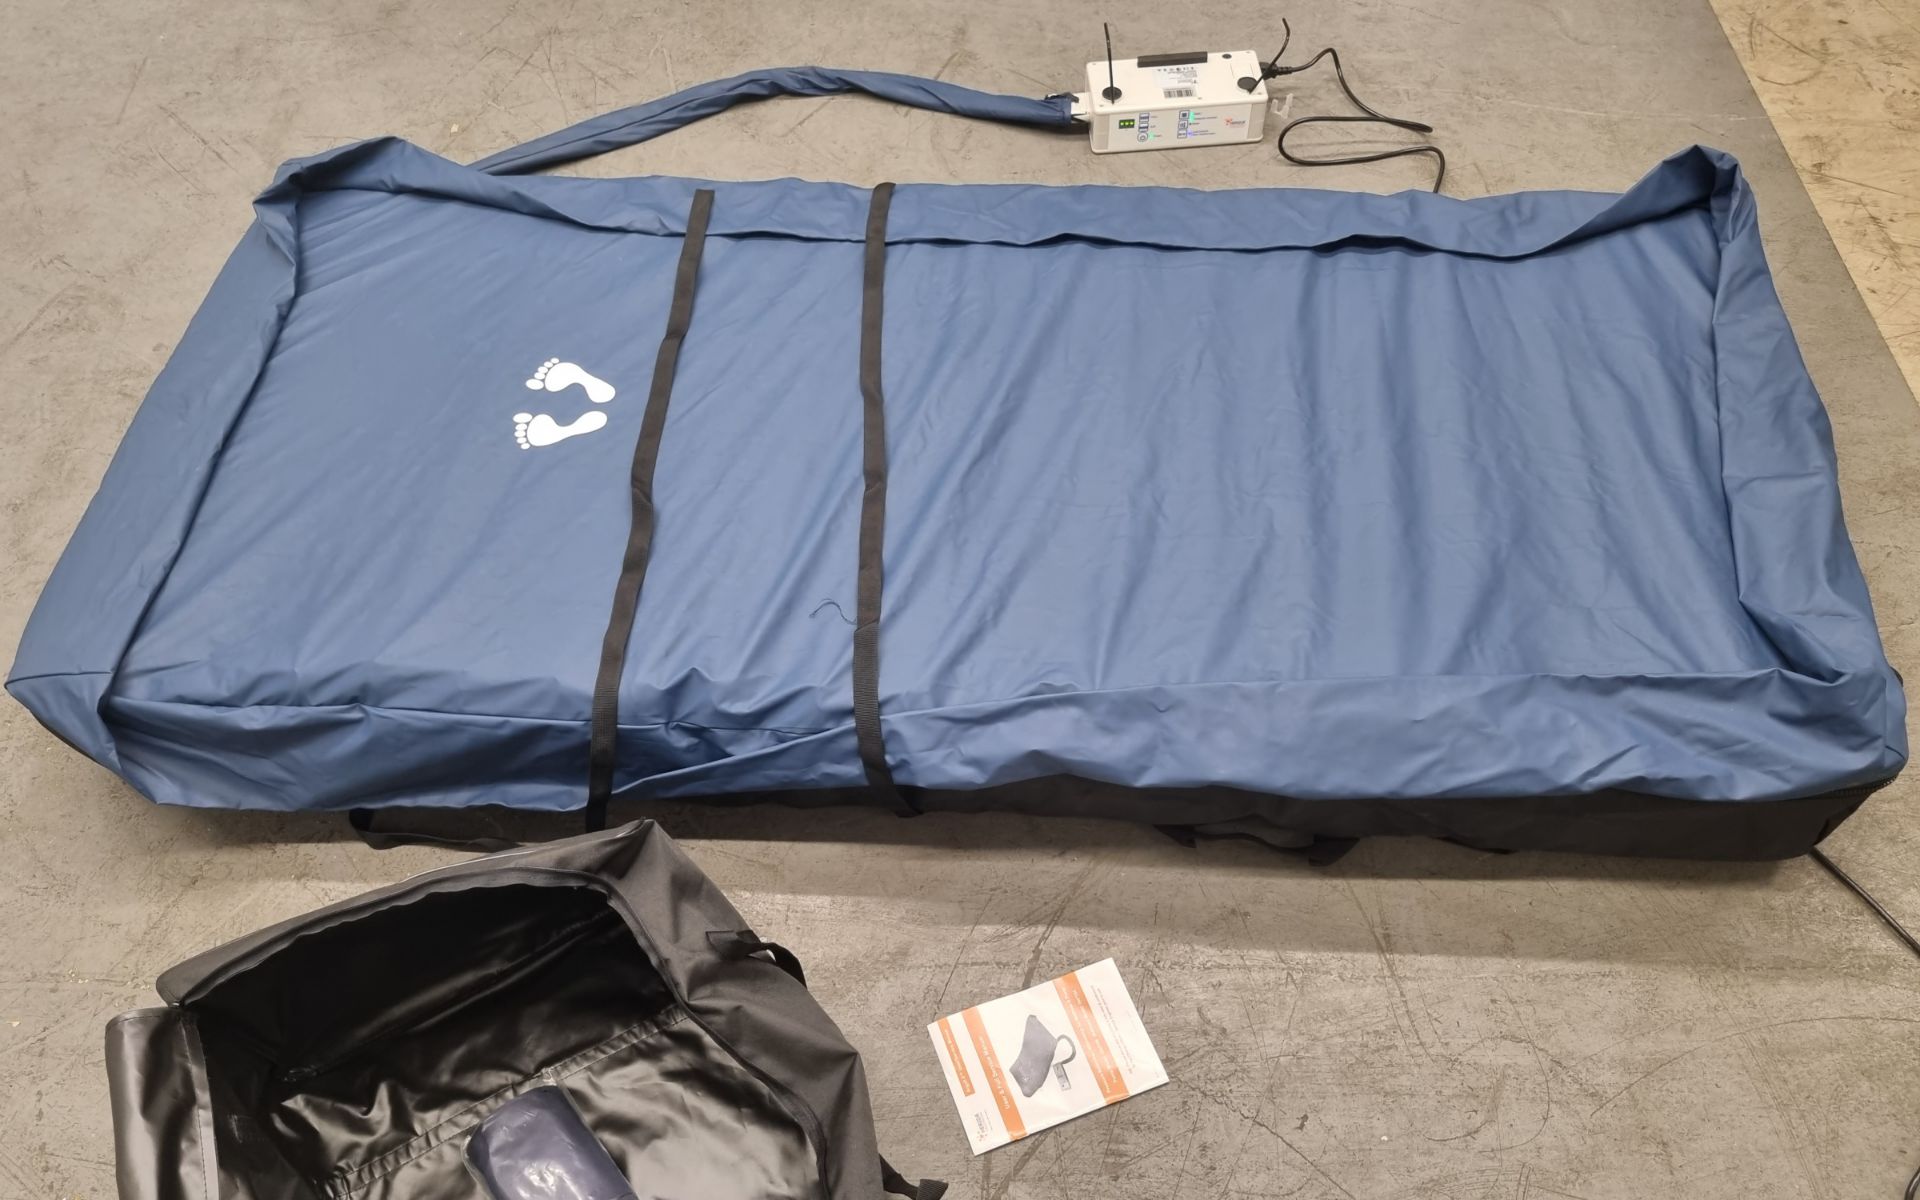 Herida Argyll II dynamic airflow mattress system with digital pump - unused in carry bag - Image 9 of 9